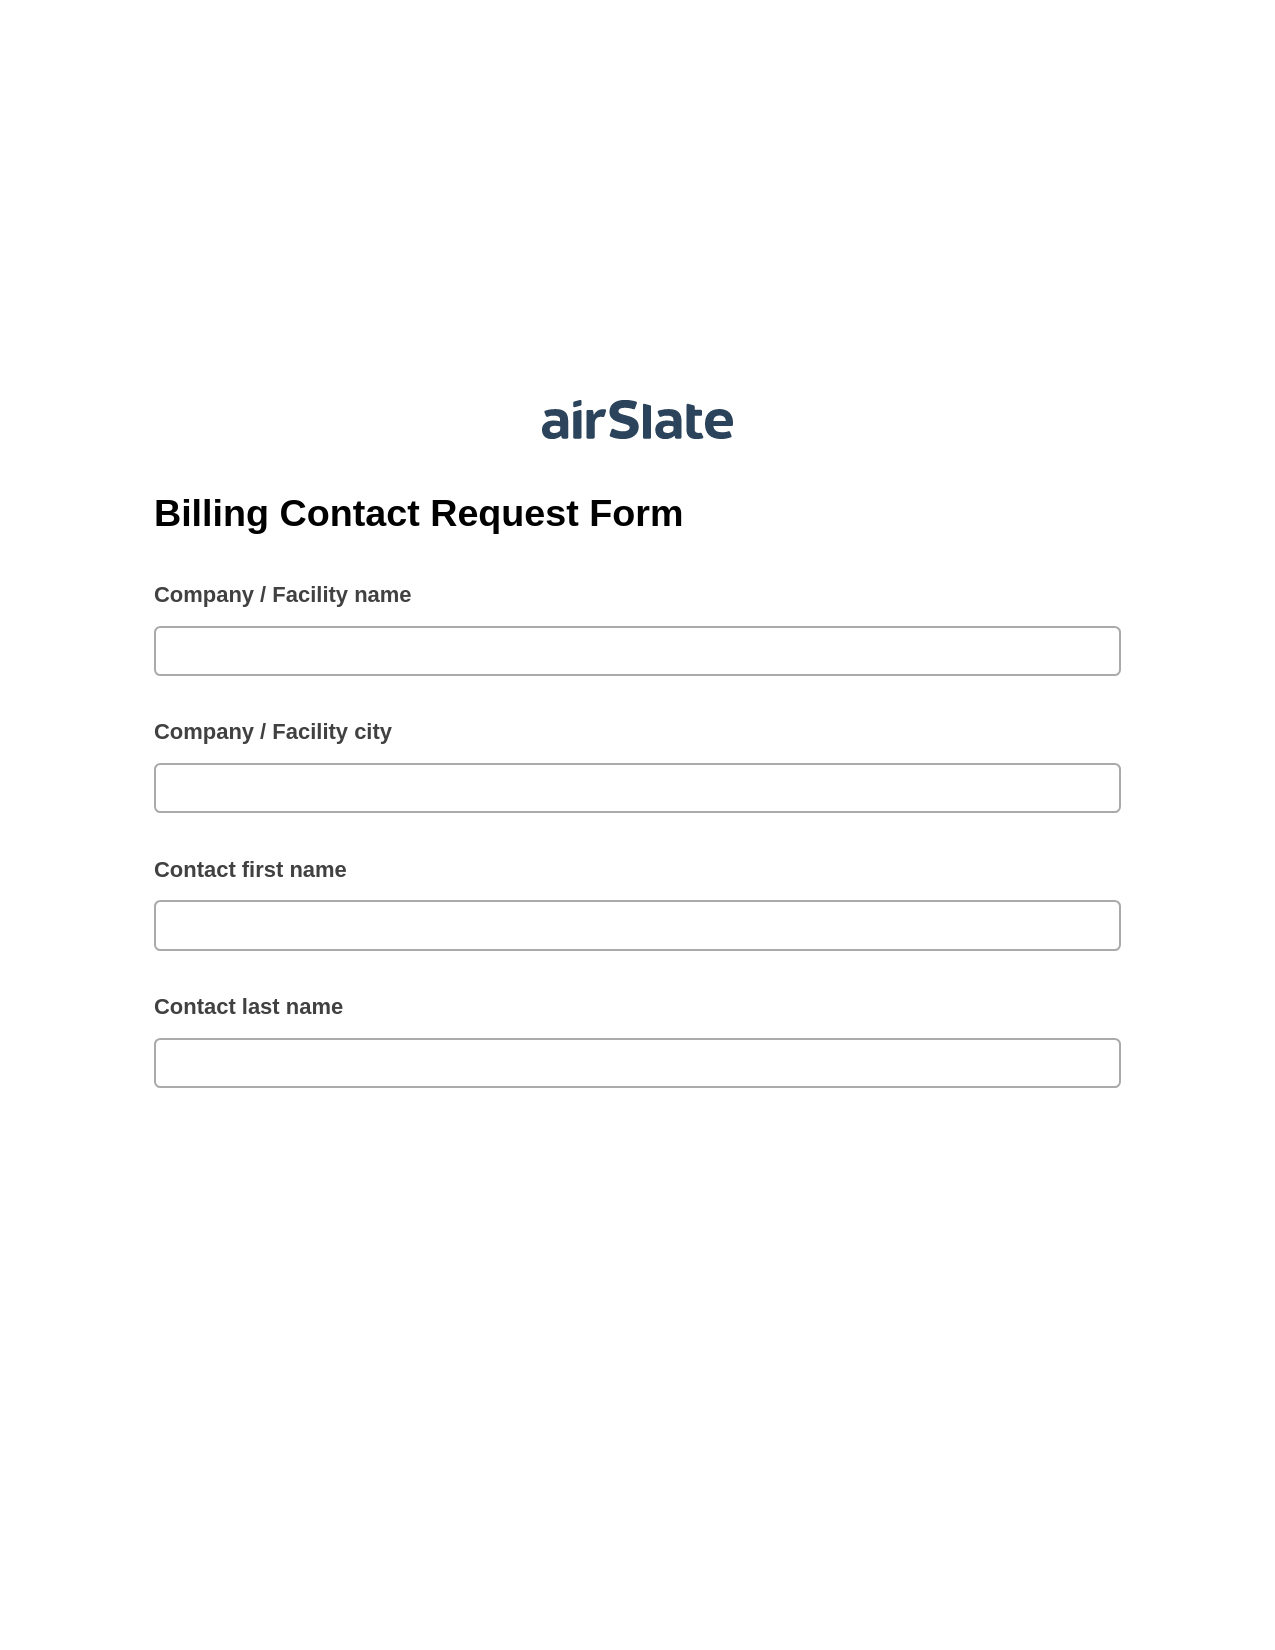 Billing Contact Request Form Pre-fill Dropdown from Airtable, Create NetSuite Records Bot, Export to Google Sheet Bot